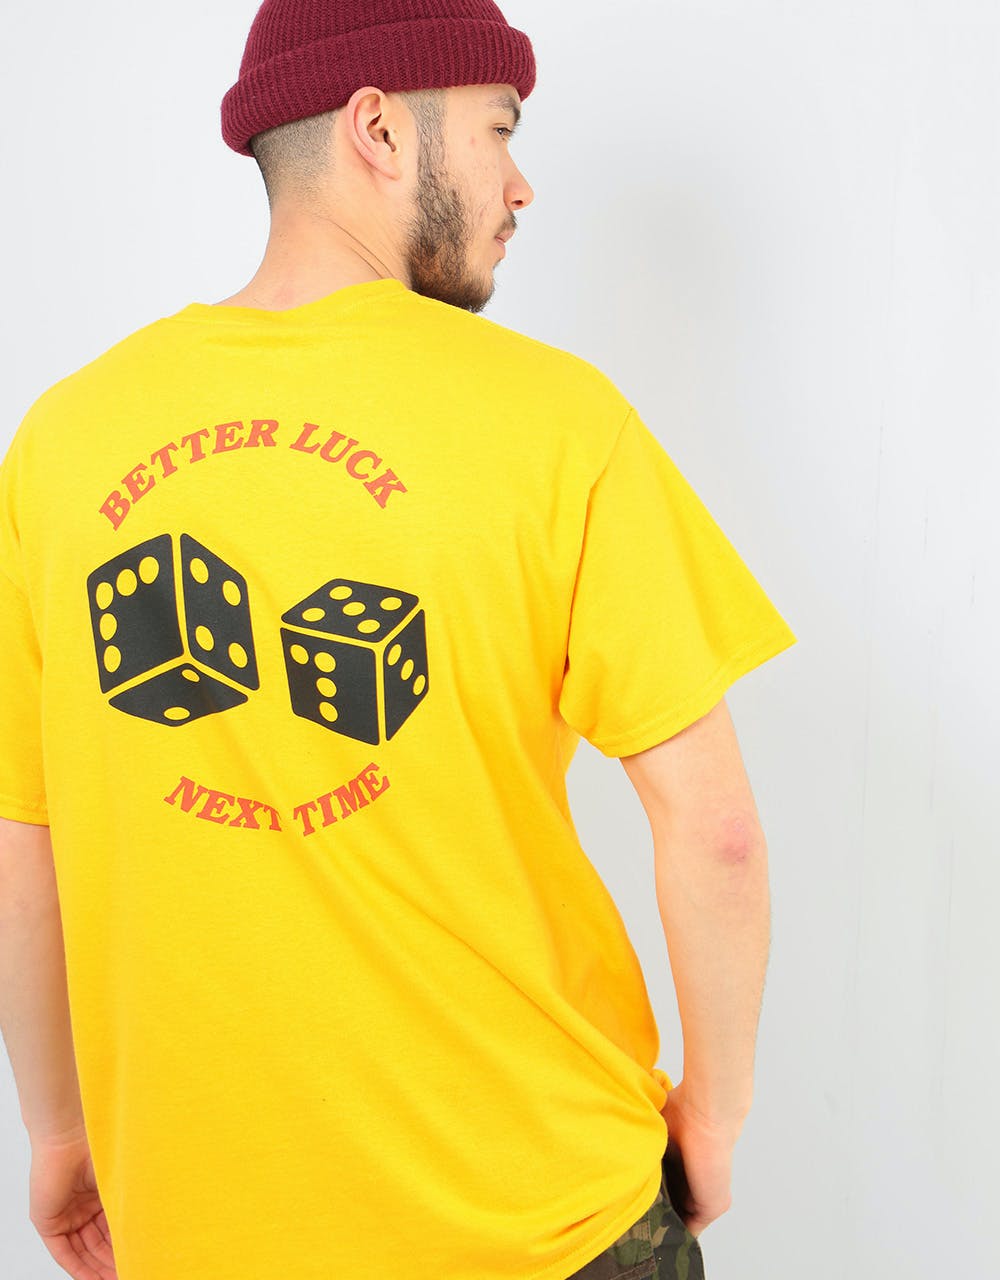 Route One Better Luck Next Time T-Shirt - Gold